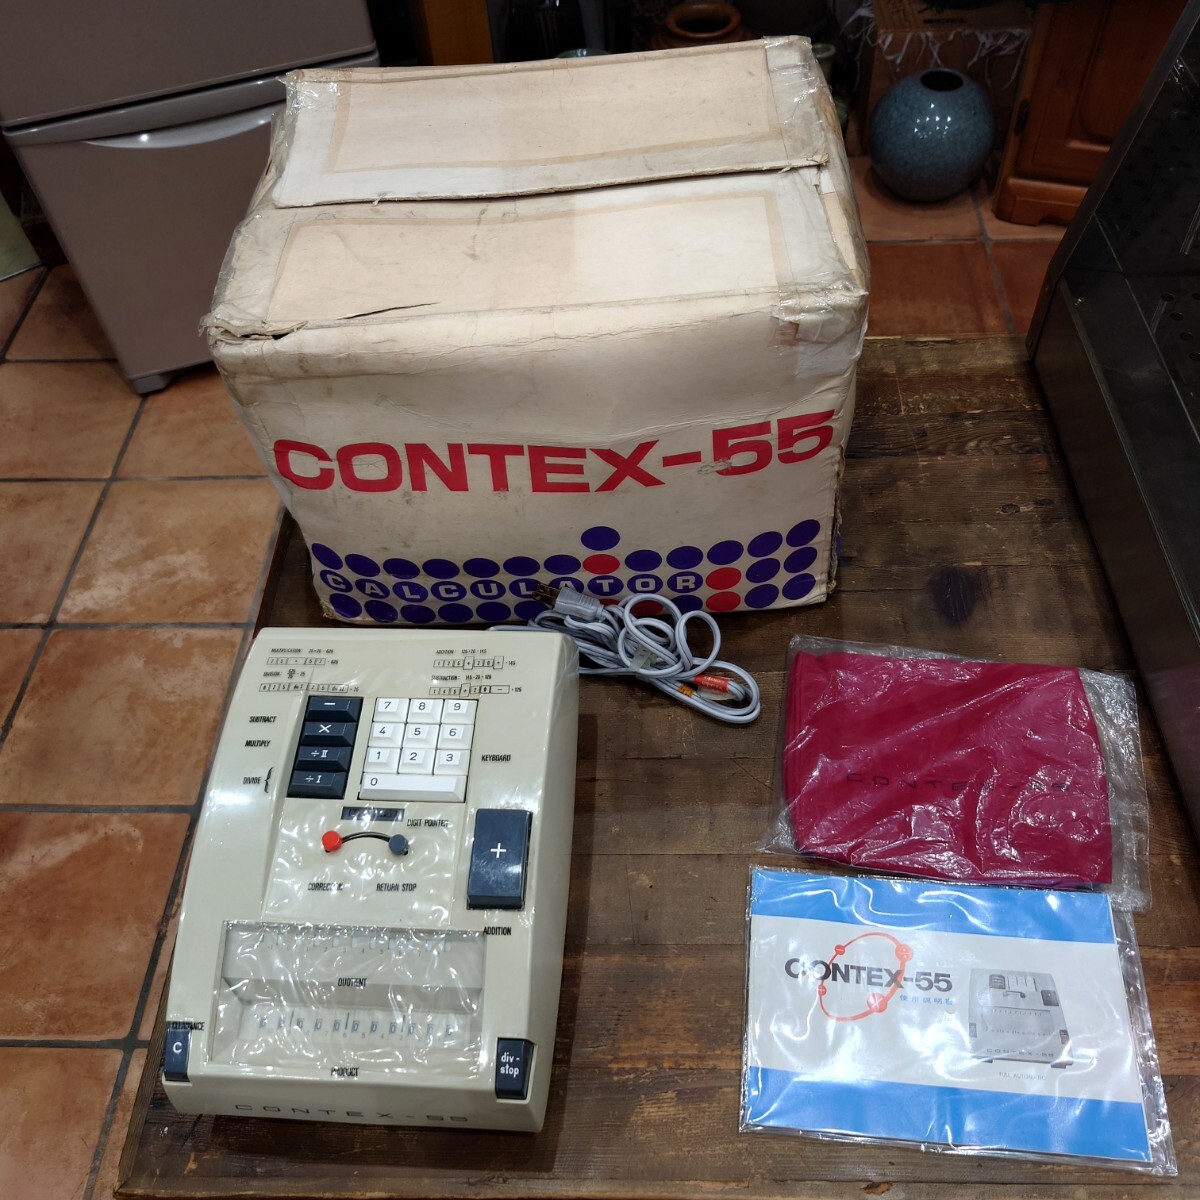 k430.3 operation verification settled Denmark made old electric count machine CONTEX-55 count machine original box instructions attaching 